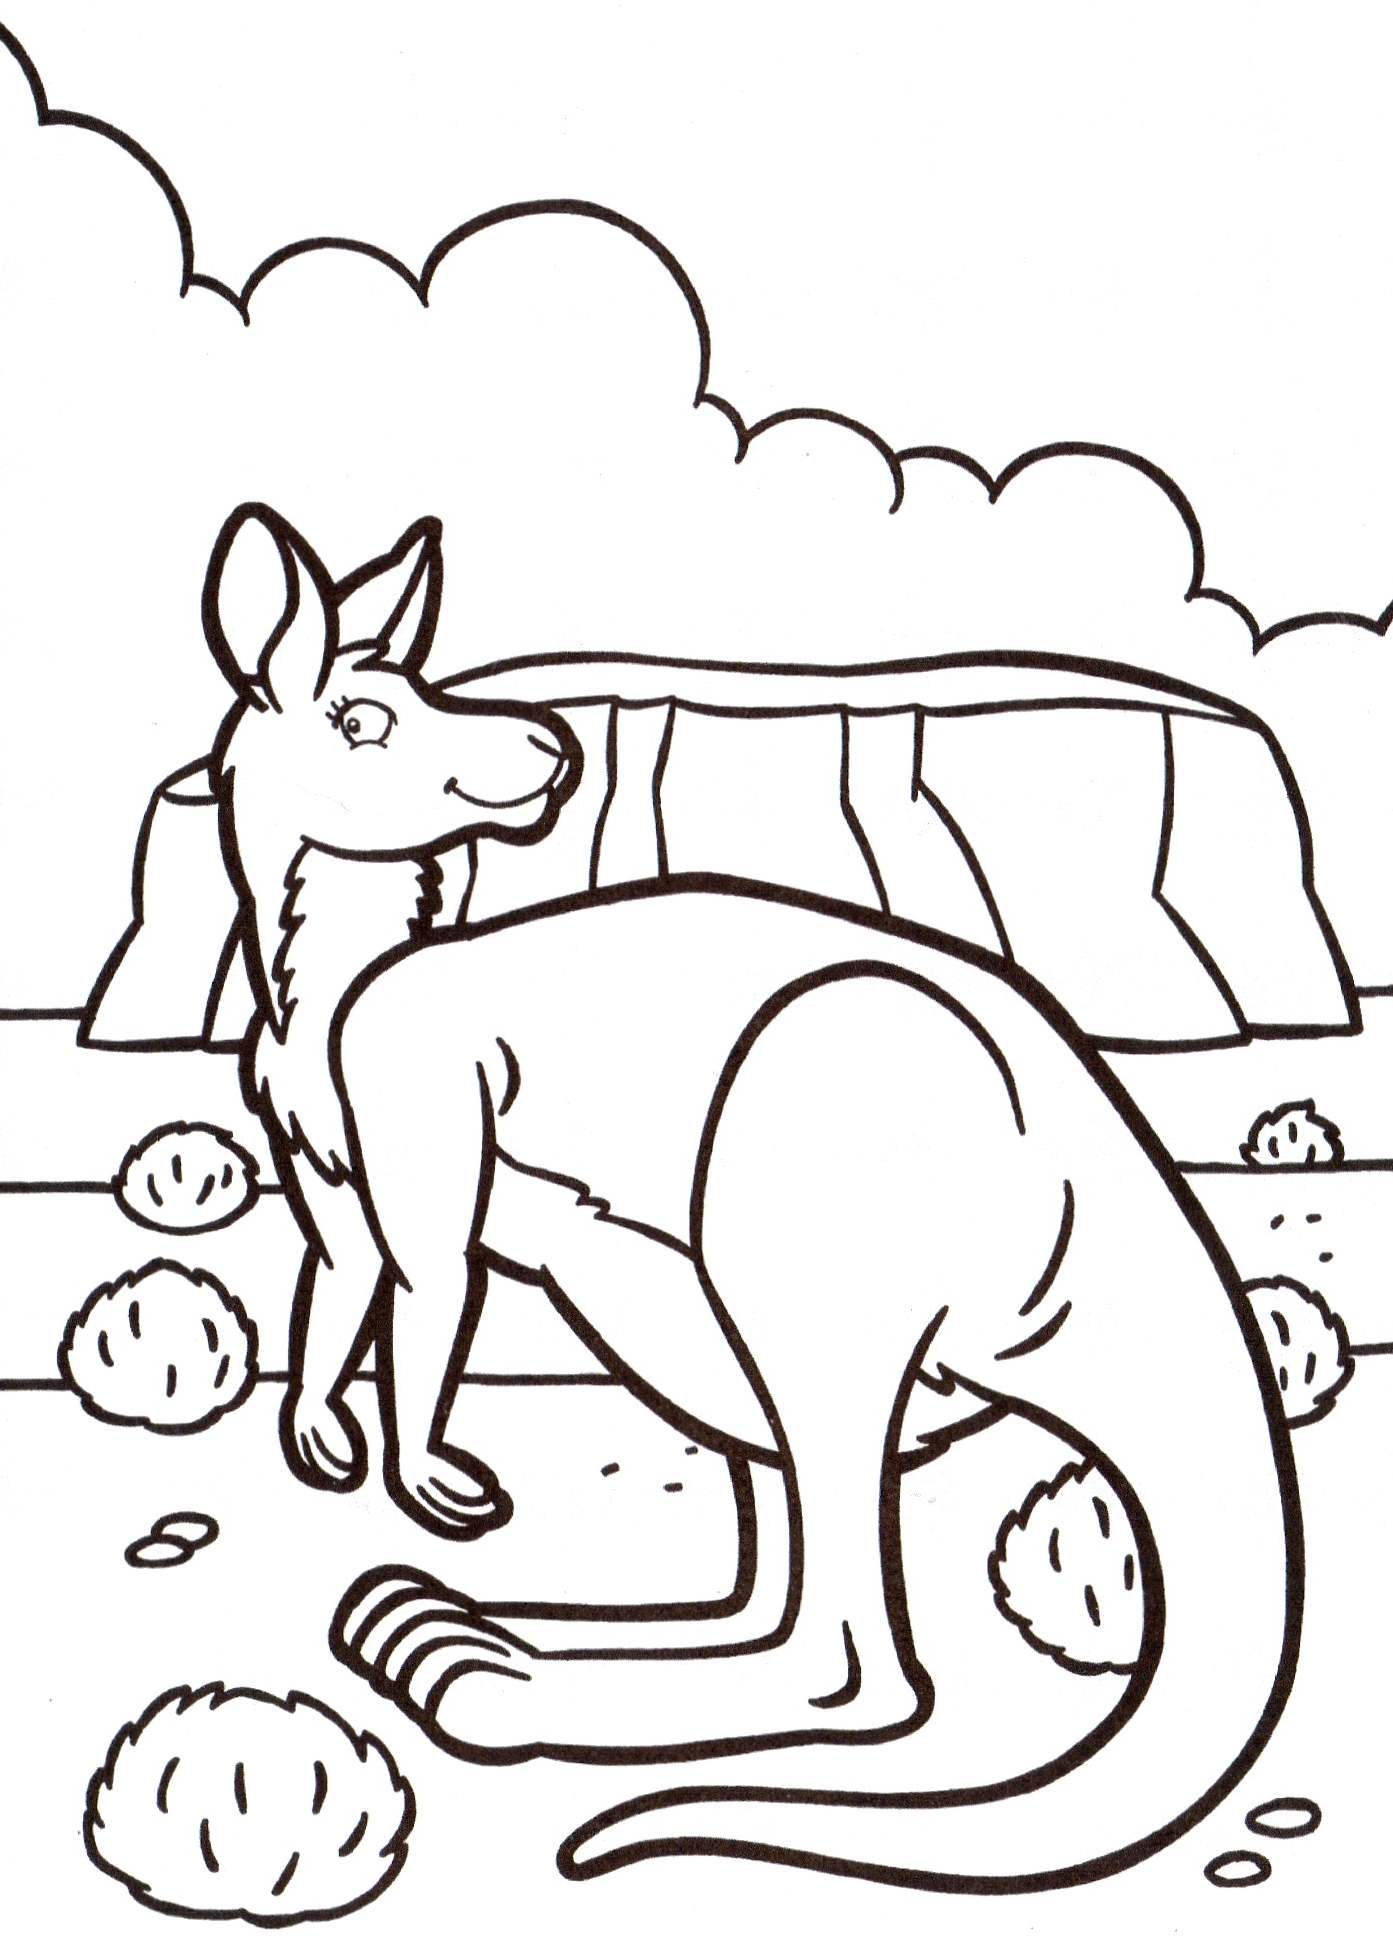 Coloring page - Adorable baby kangaroo ♥ Online and Print for Free!